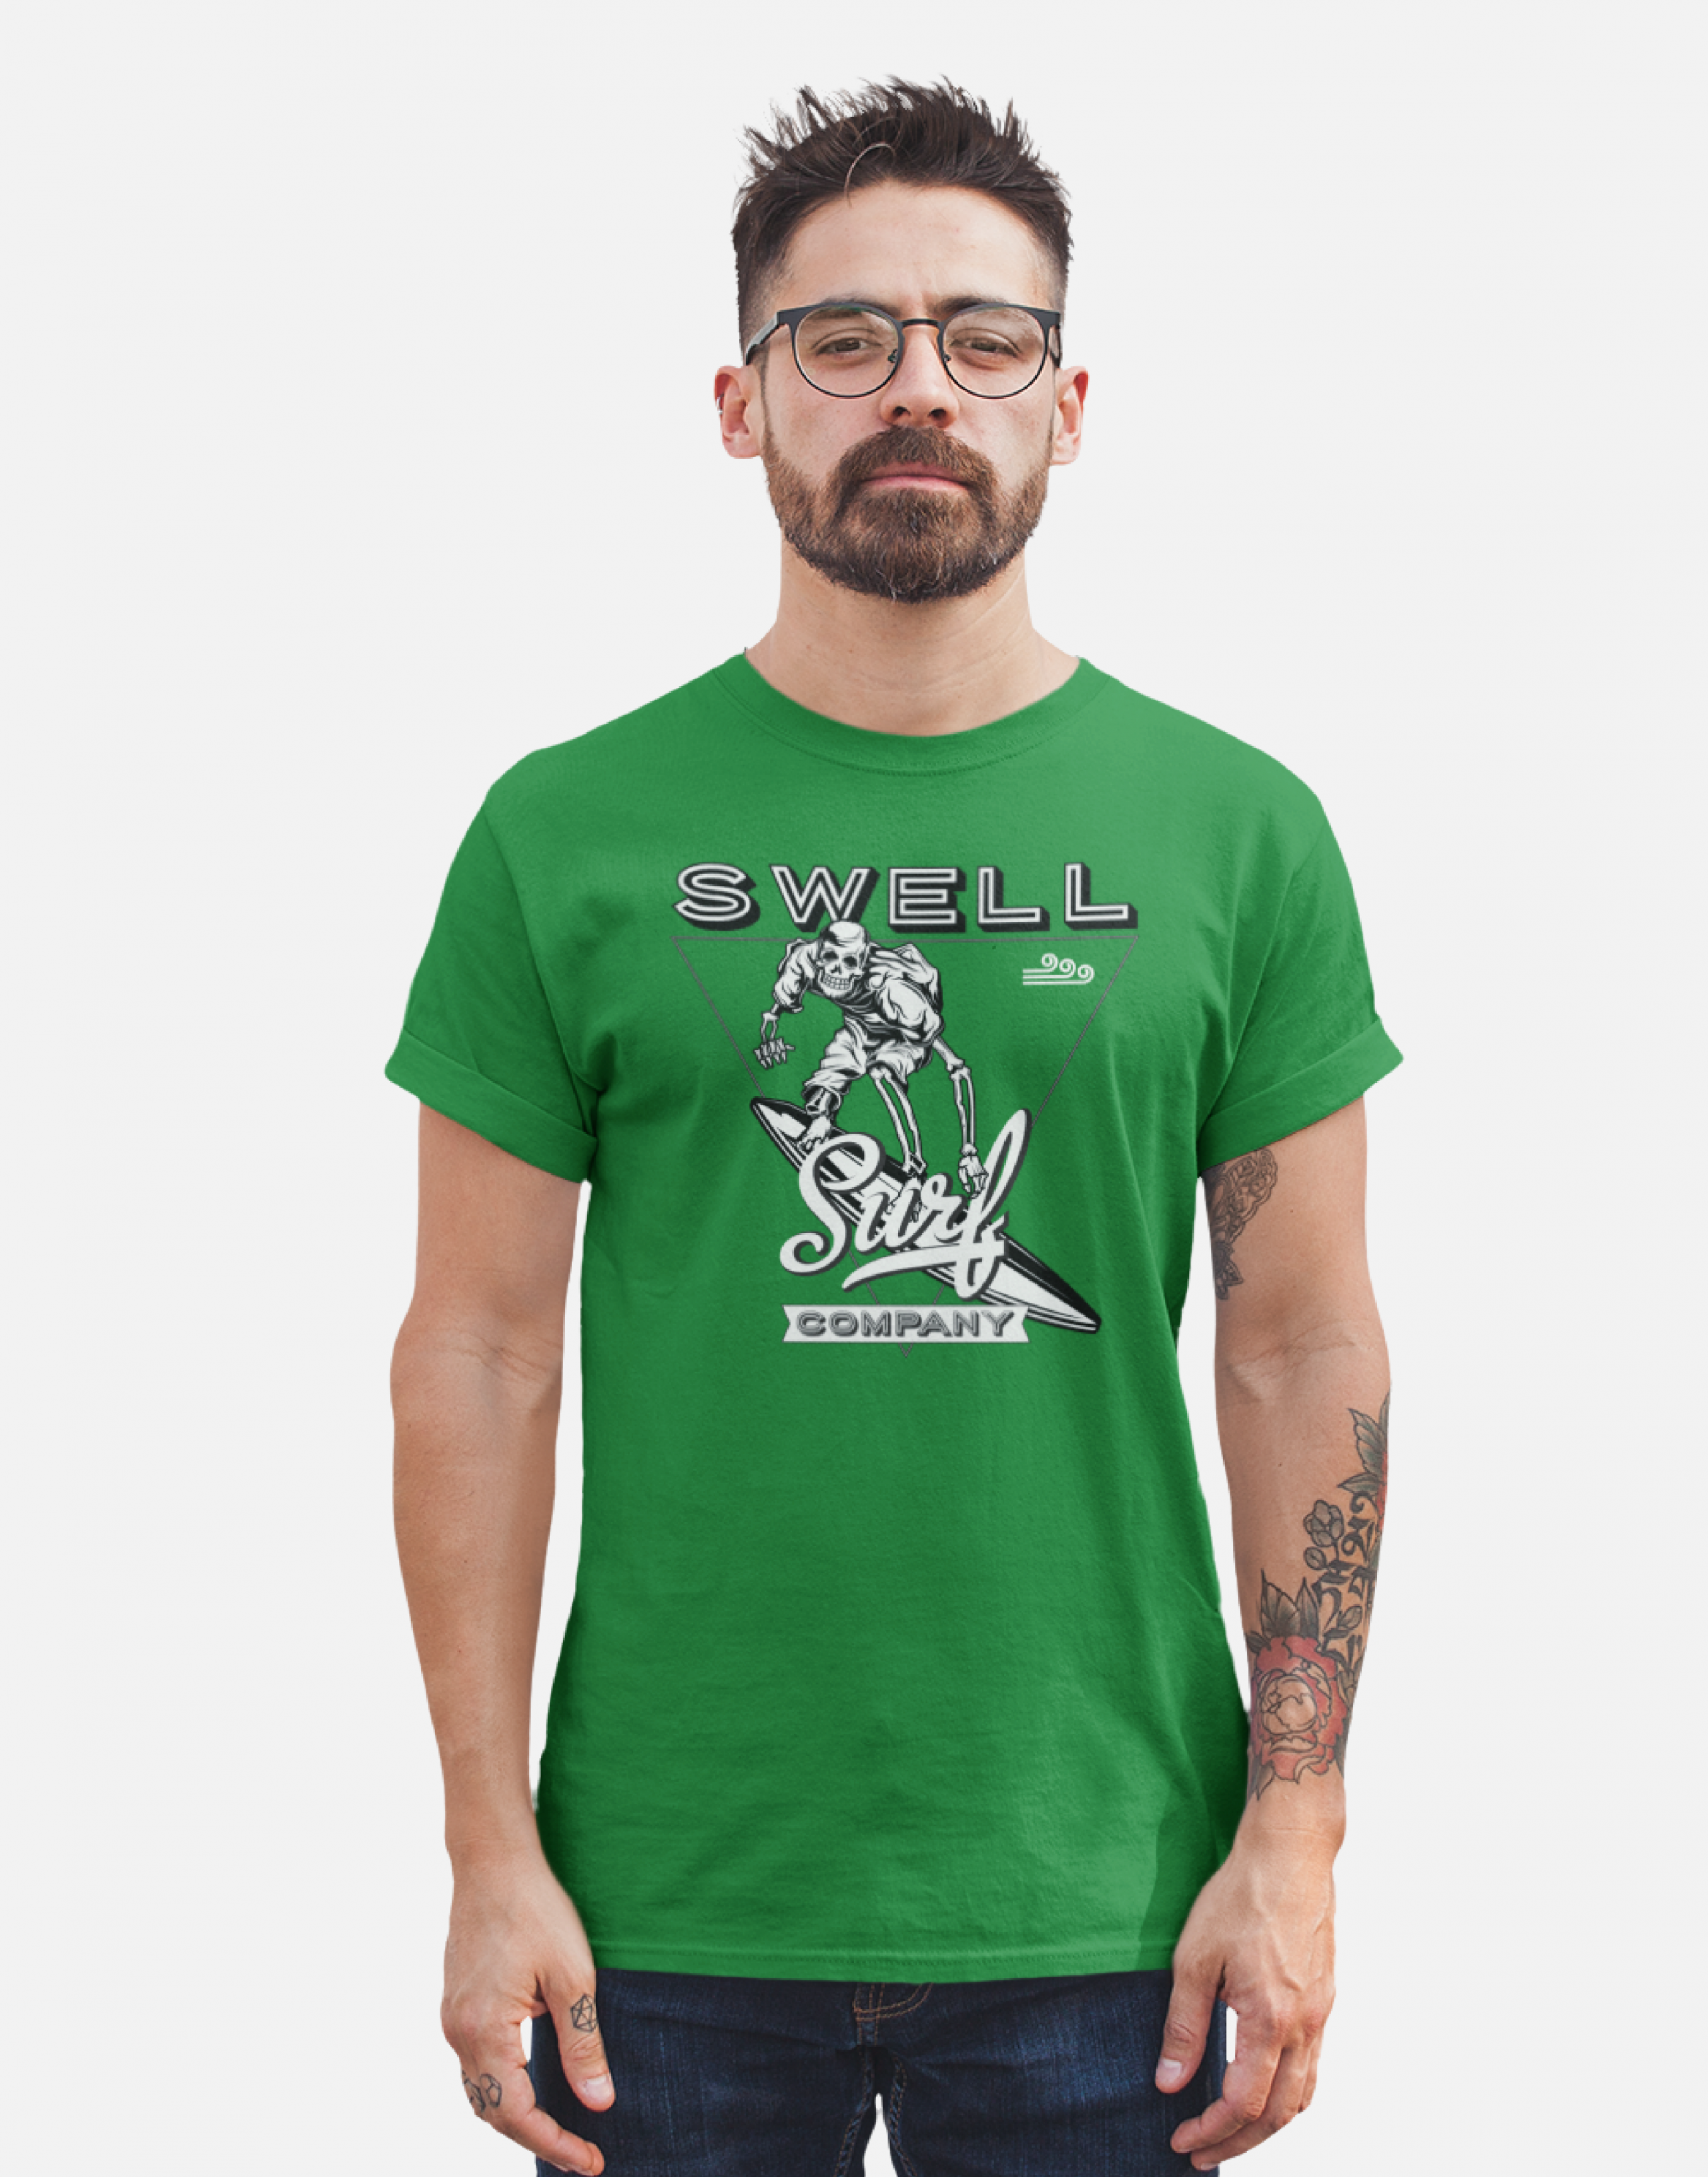 Man wearing a kelly green Swellone tshirt with Skelton surf logo.